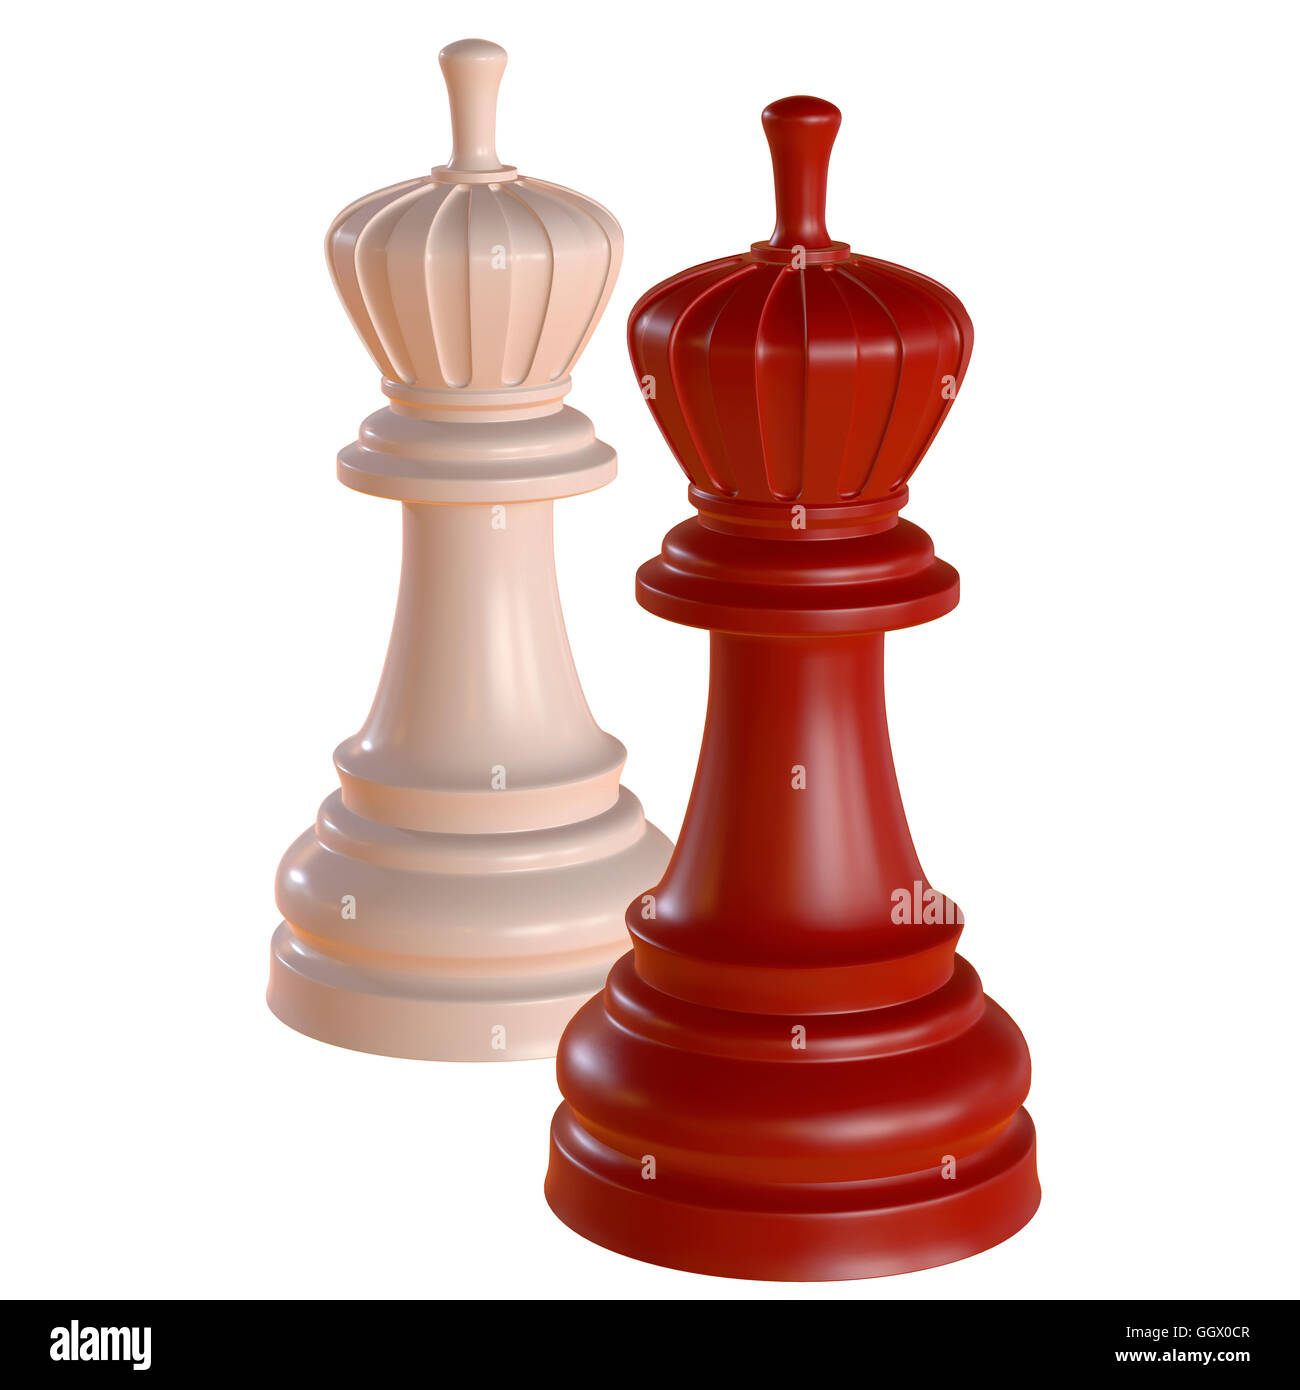 3d illustration of isolated chess game figurine Stock Photo - Alamy